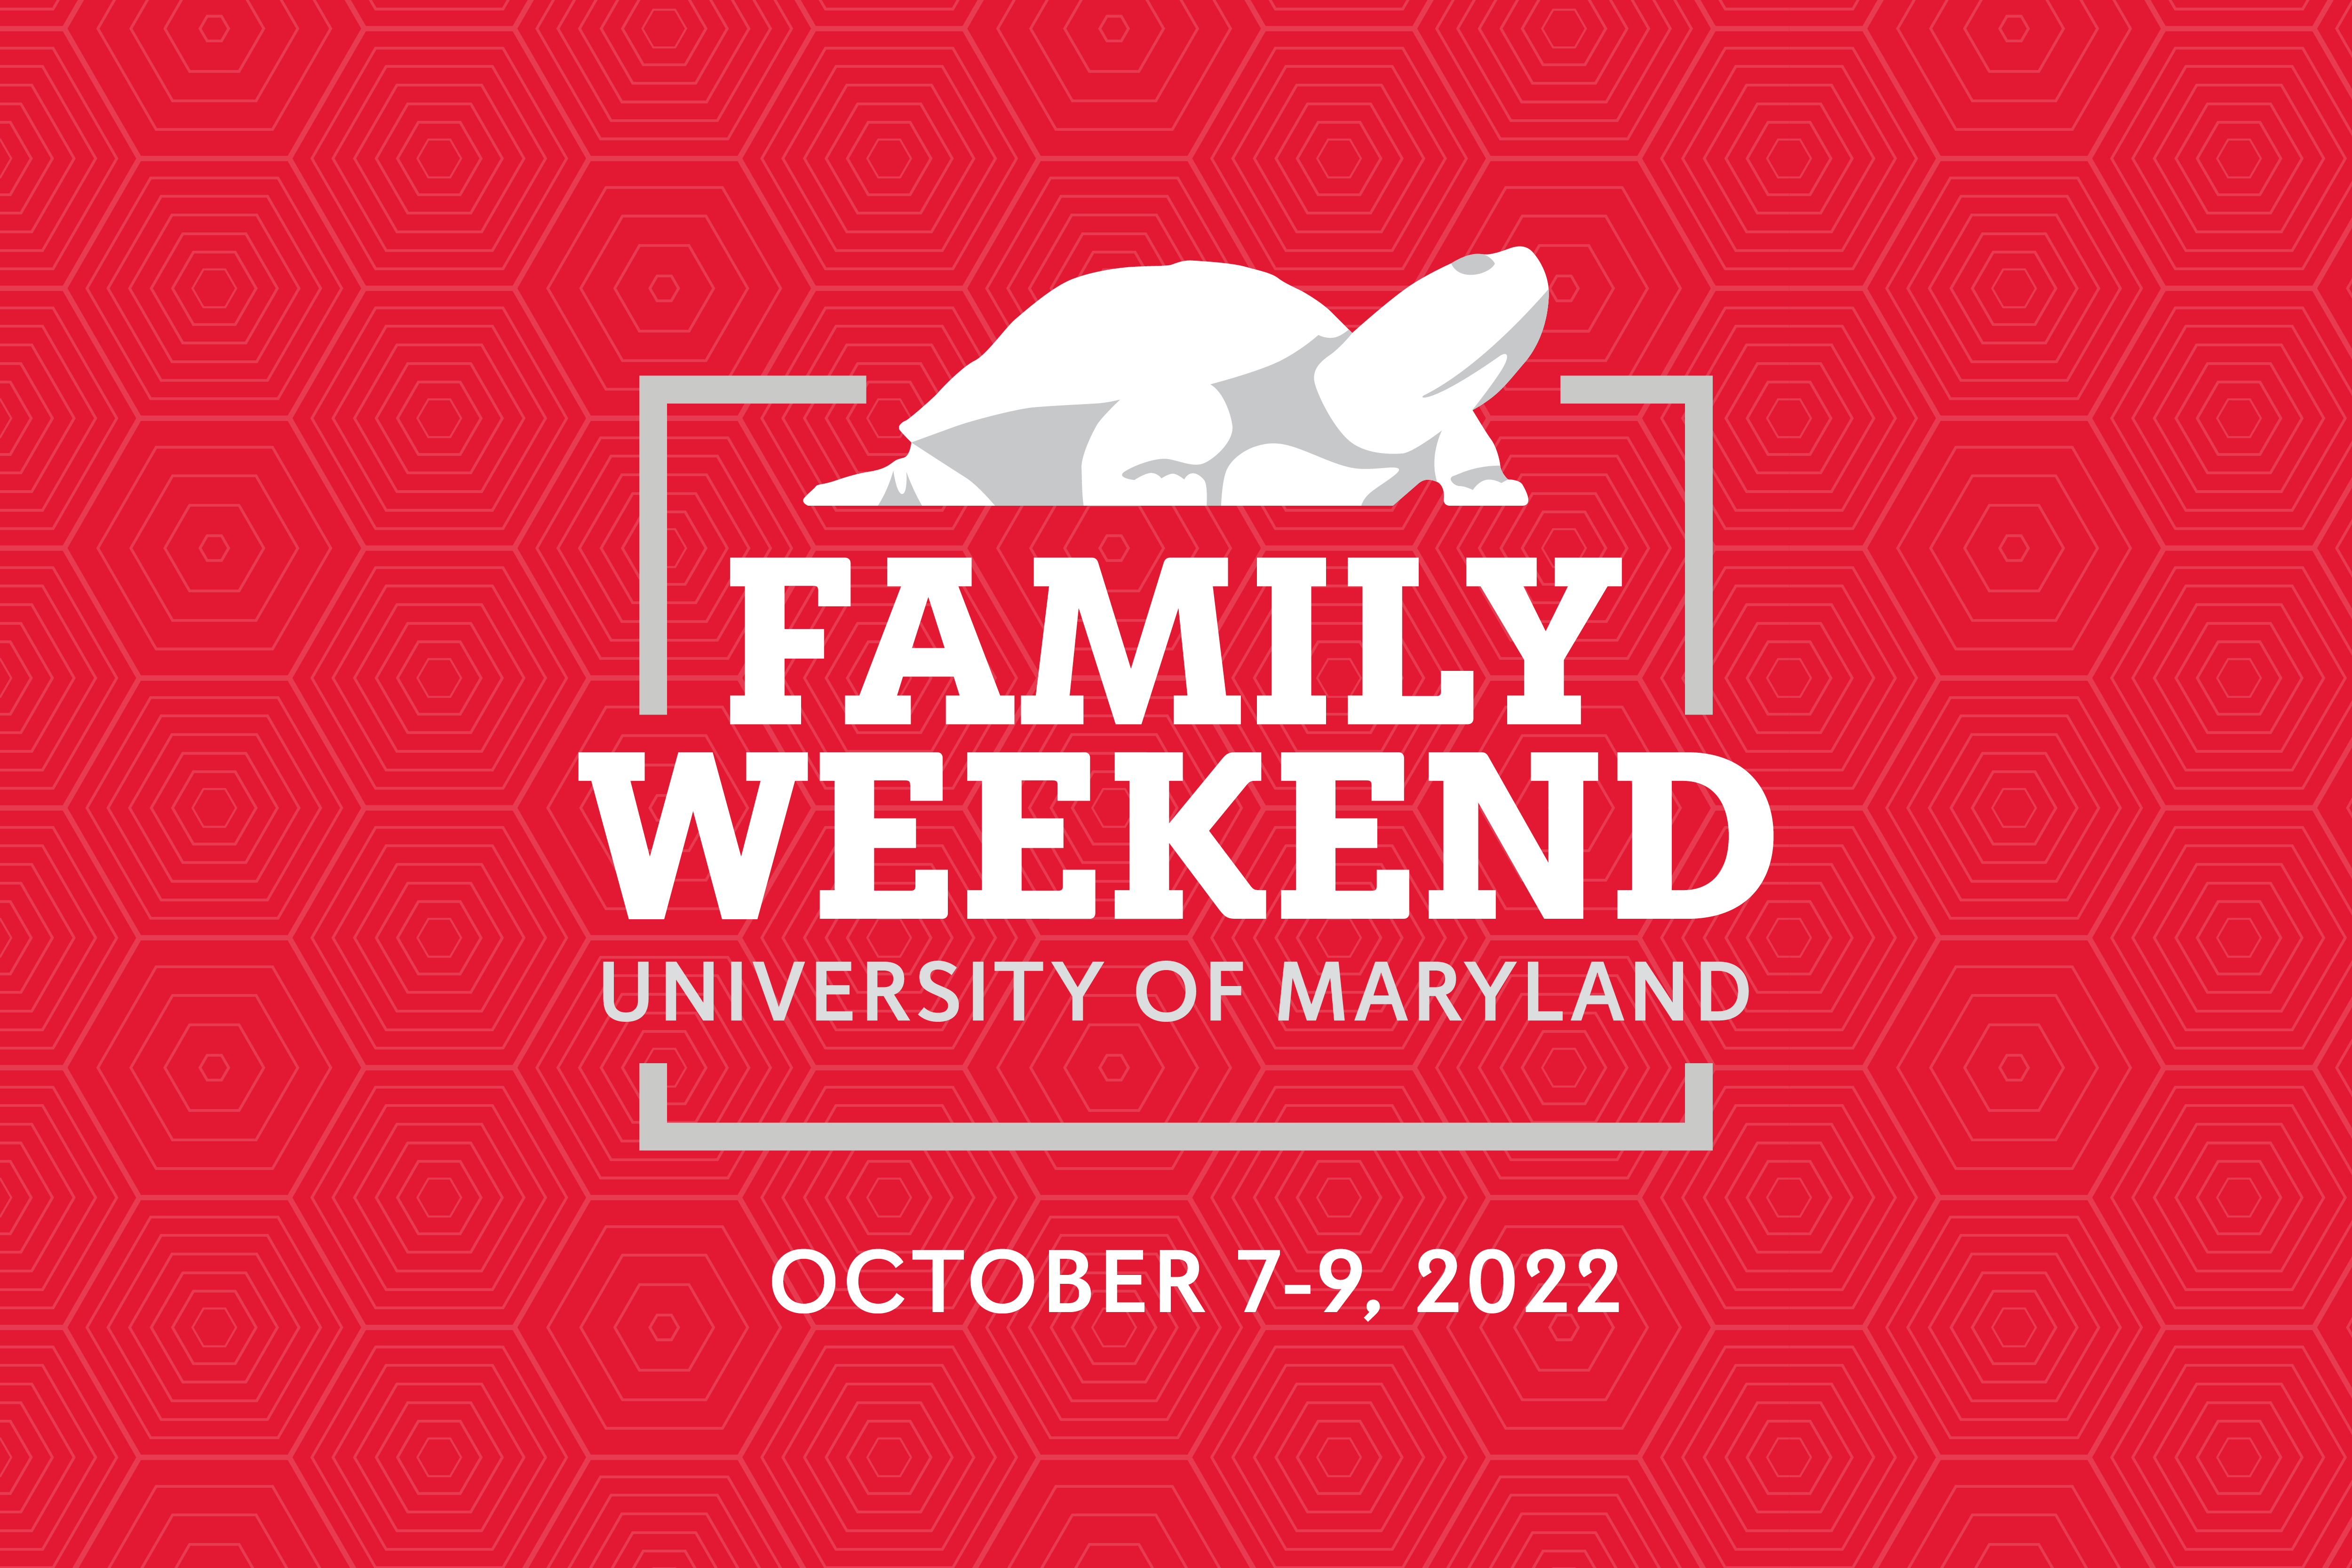 Terps Set for Weekend Events - University of Maryland Athletics